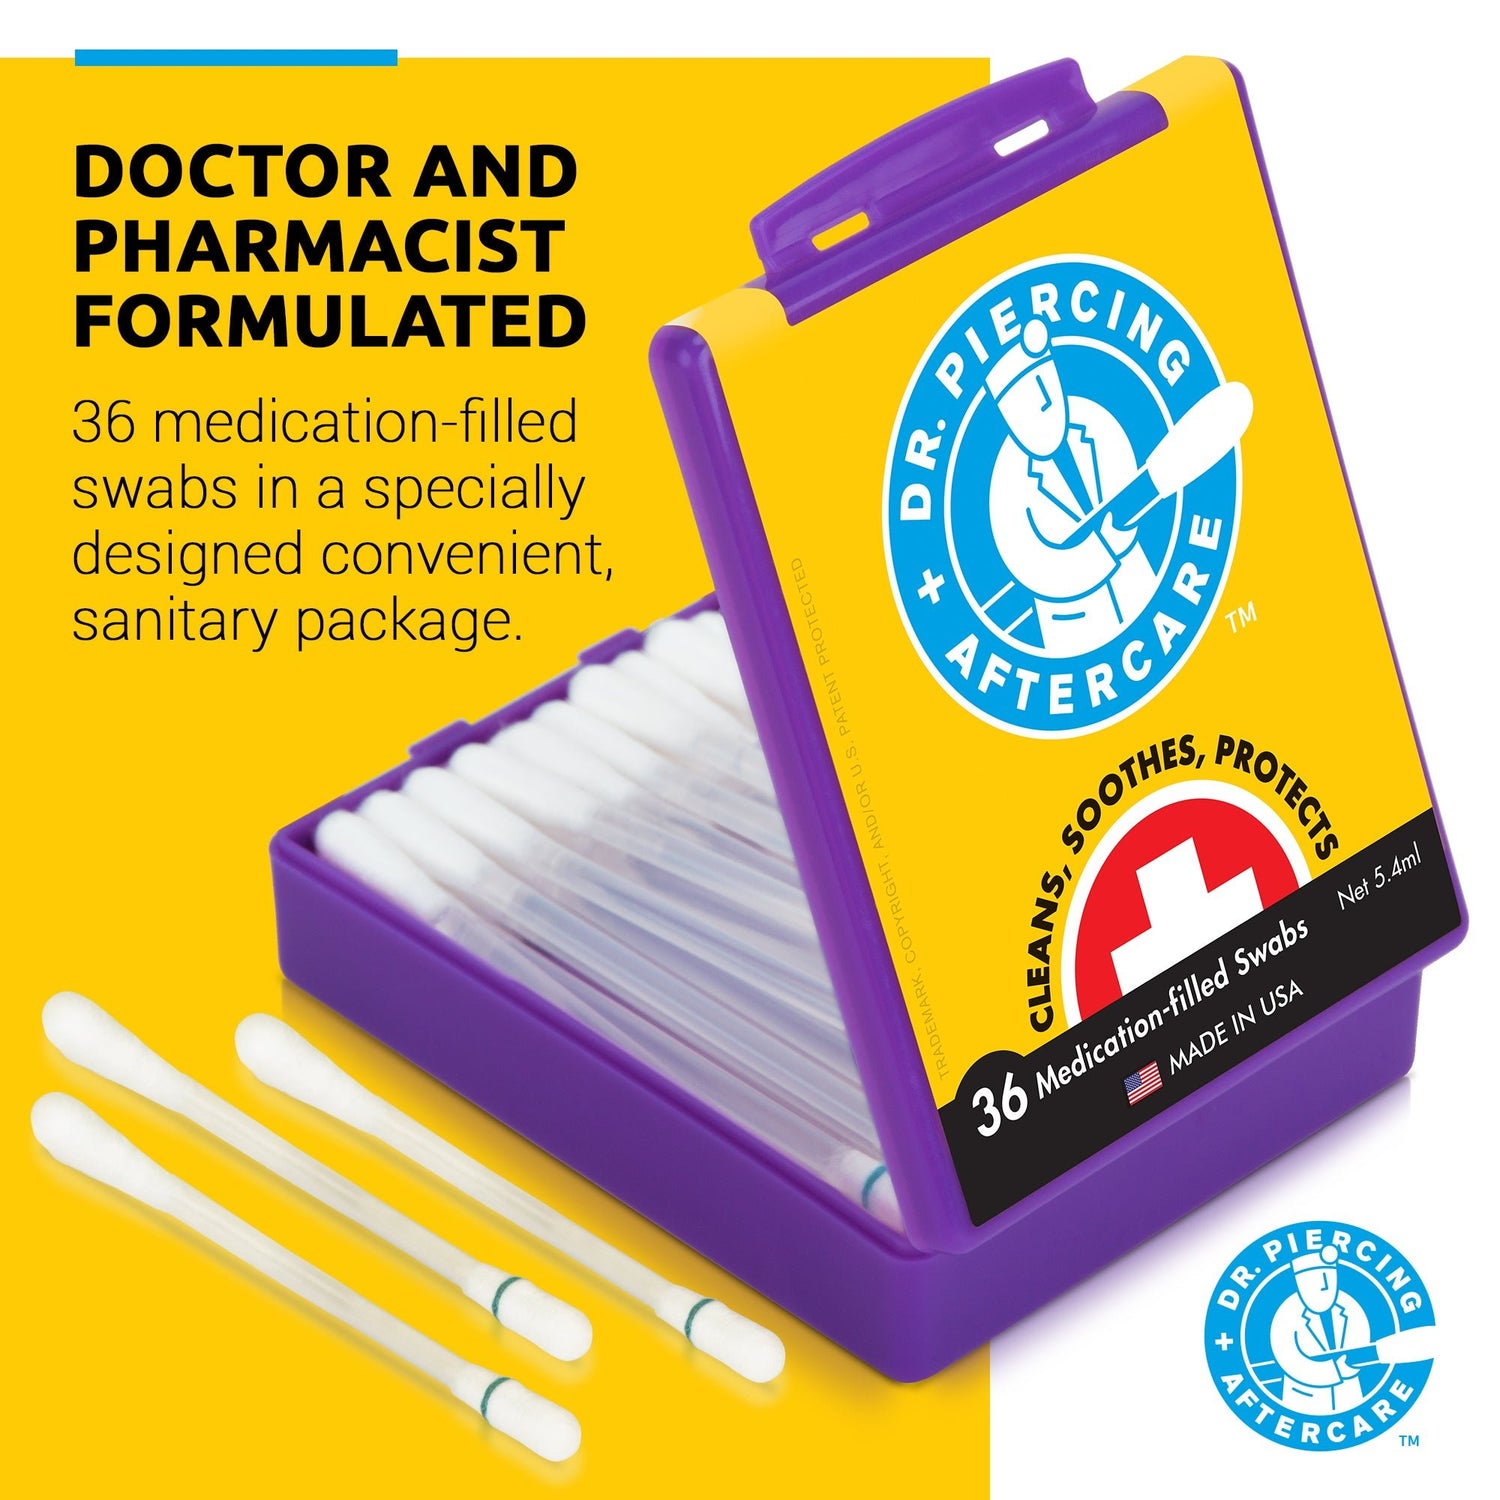 2 Pack Dr. Piercing Aftercare Swabs - Saline Solution for Wound Care. Protects wounds, burns, scrapes - Dr. Piercing Aftercare